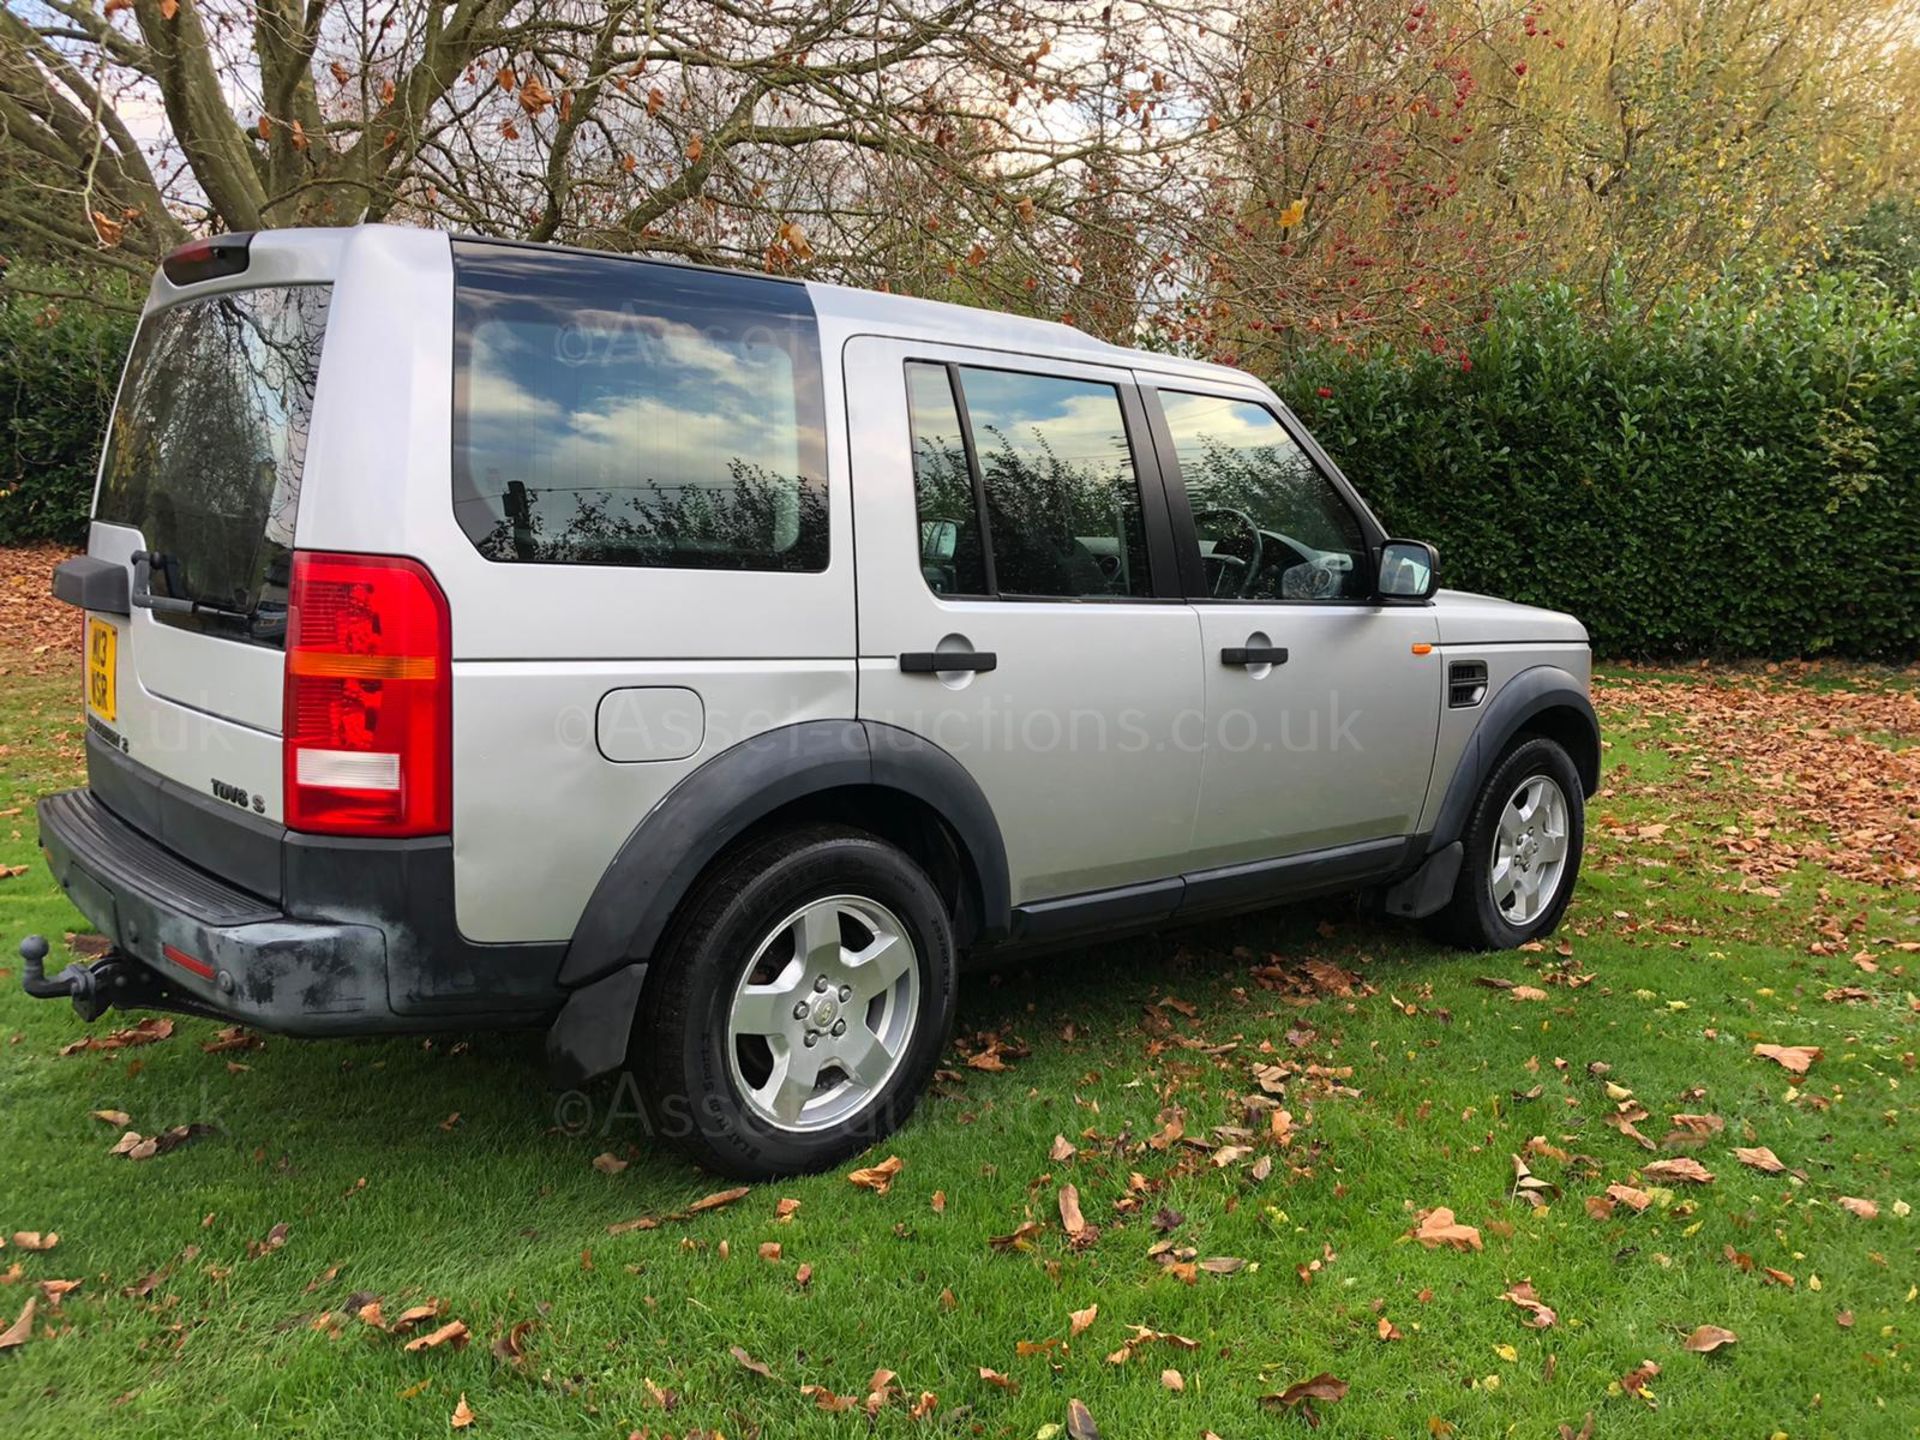 2005 LAND ROVER DISCOVERY 3 TDV6 S AUTO SILVER ESTATE, 146,941 MILES *NO VAT* - Image 7 of 17